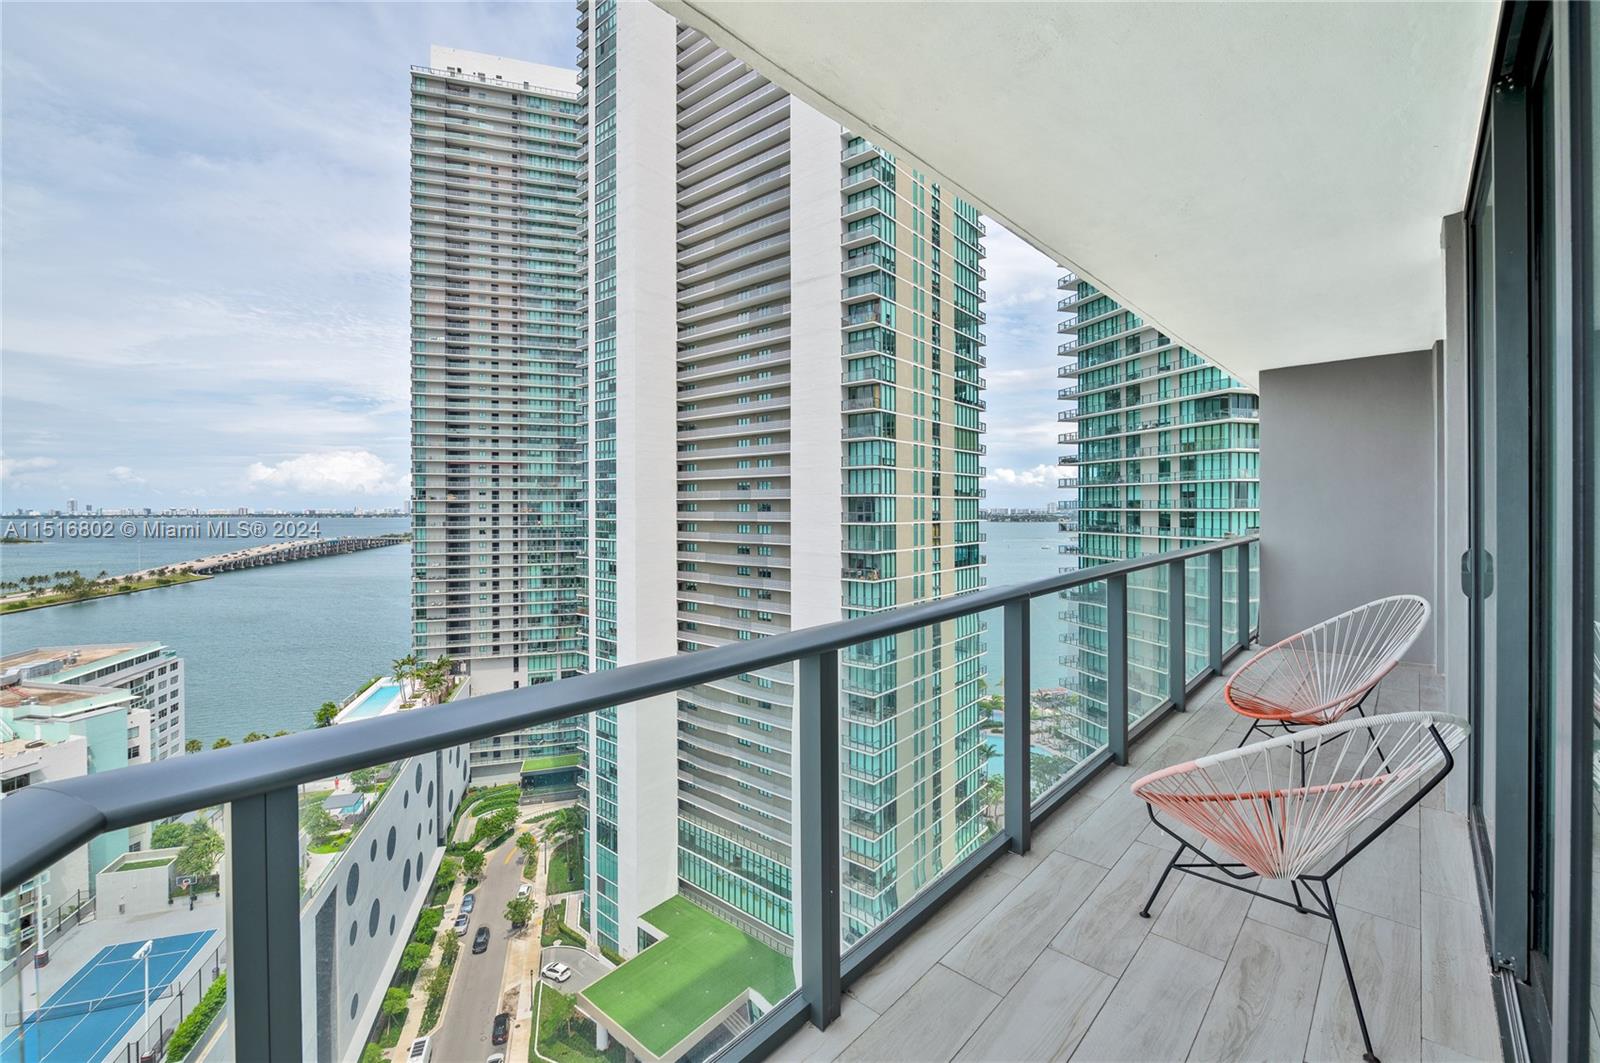 Enjoy your new residence nestled in the heart of Miami! This remarkable 3-bedroom, 2-bathroom apartment is found in the coveted Edgewater neighborhood at Paraiso Bayviews. Adorned with lavish furnishings and unparalleled meticulousness, this apartment is an idyllic haven to call your new home. Being fully furnished, it provides everything you need for a seamless transition into the lively Miami lifestyle. Indulge in the building's exceptional amenities, including a cutting-edge fitness center, a resort-style pool, tennis courts, and a breathtaking rooftop terrace boasting panoramic city vistas from every angle. Take your first step into luxurious Miami living and schedule a showing today!